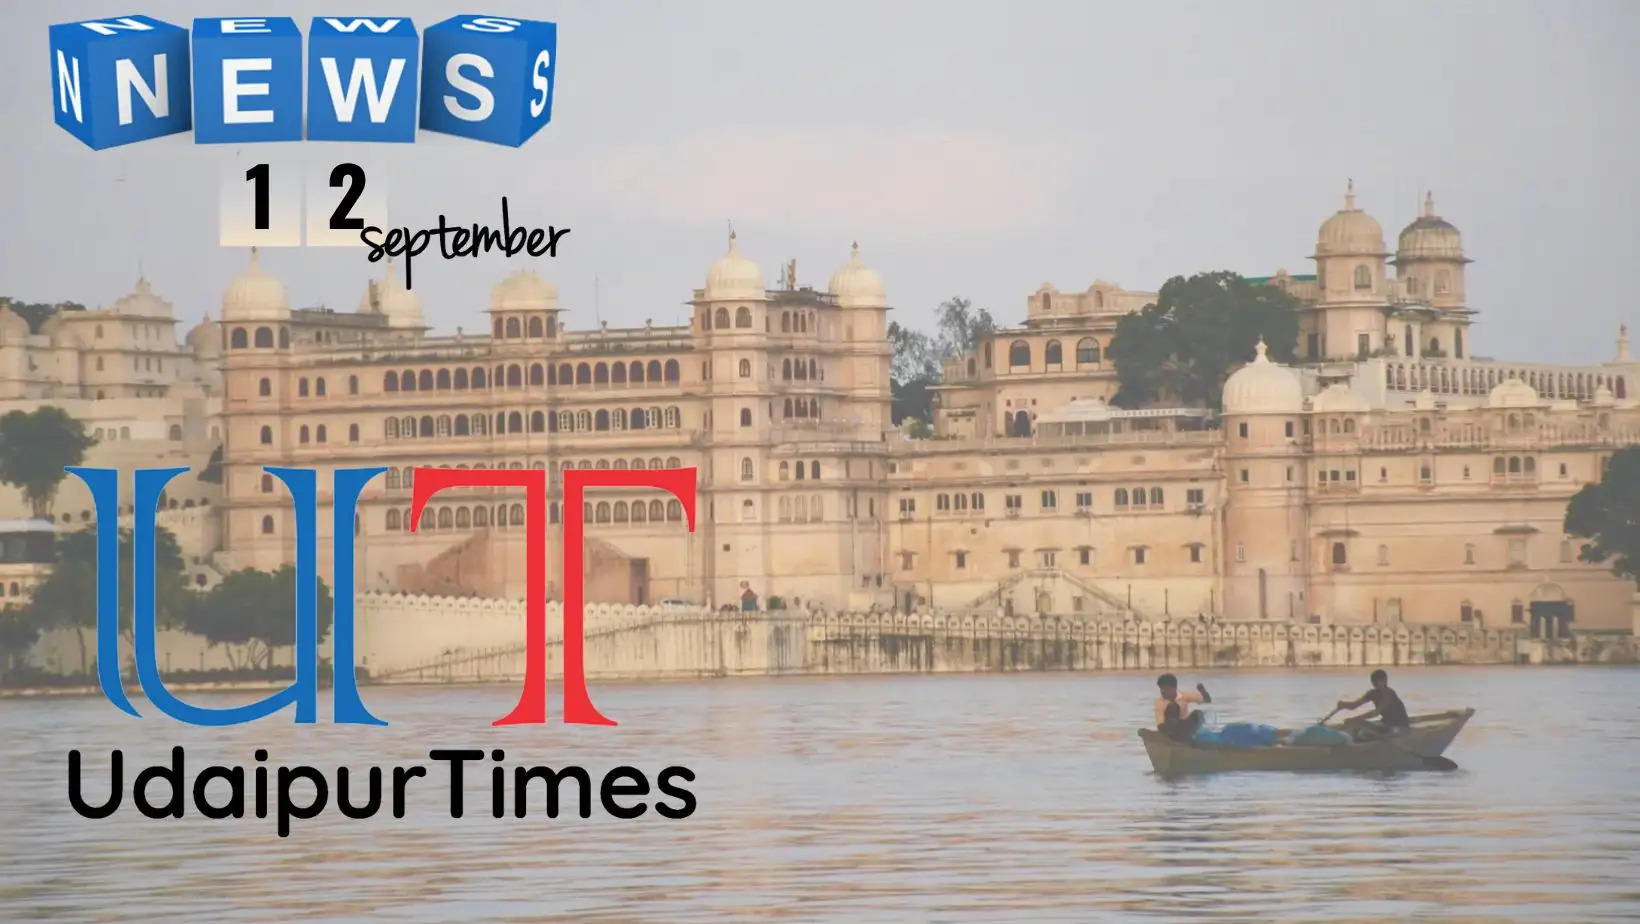 Latest News from Udaipur,  Latest News from Rajsamand, Latest News from Dungarpur, Latest News from Salumber, Latest News from Chittorgarh,  Latest News from Bhilwara,  Latest News from Banswara, Latest News from Pratapgarh